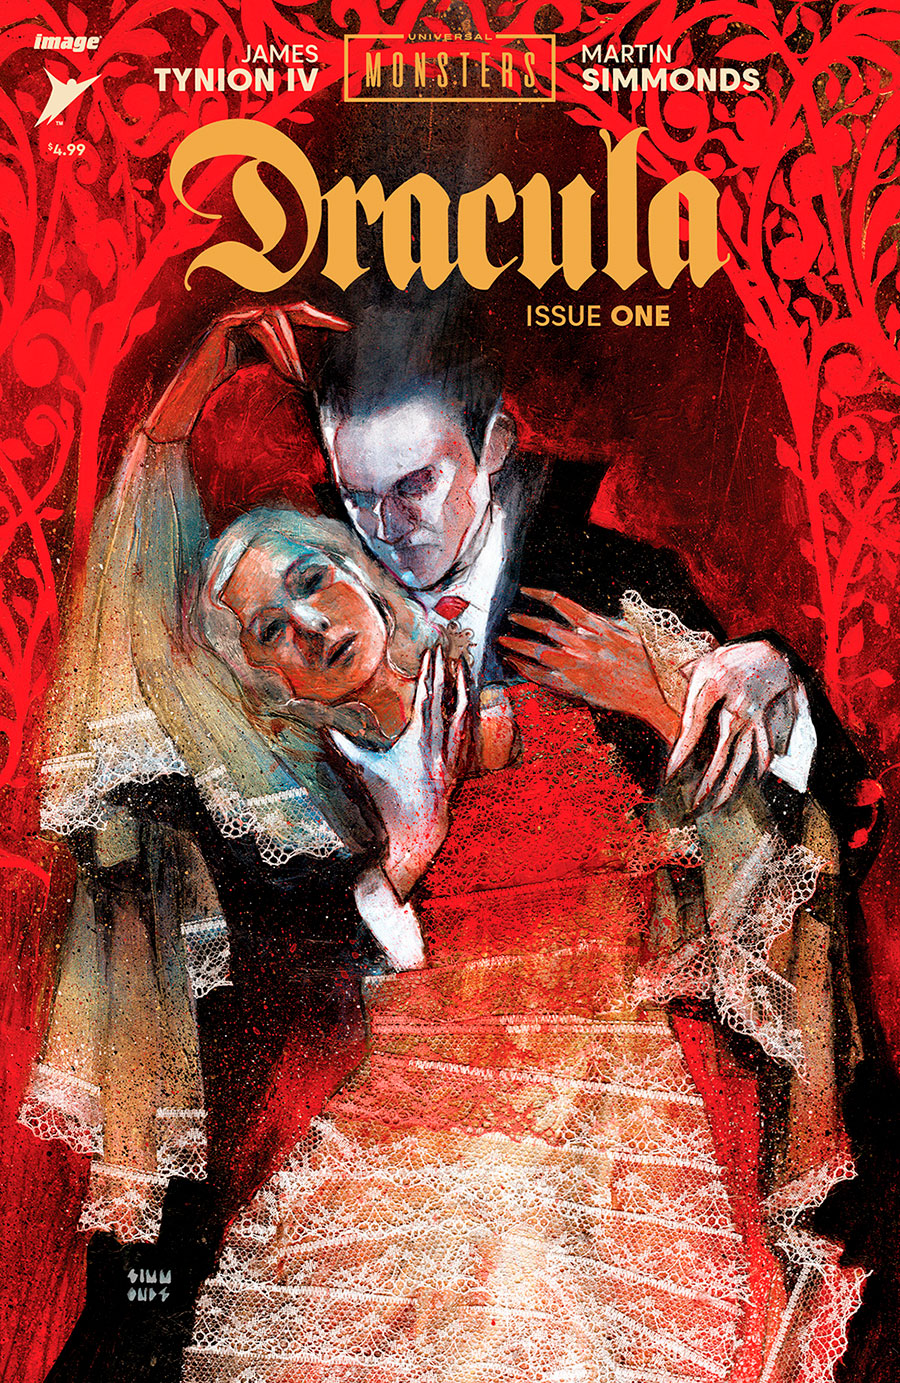 Universal Monsters Dracula #1 Cover A Regular Martin Simmonds Cover (Limit 1 Per Customer)